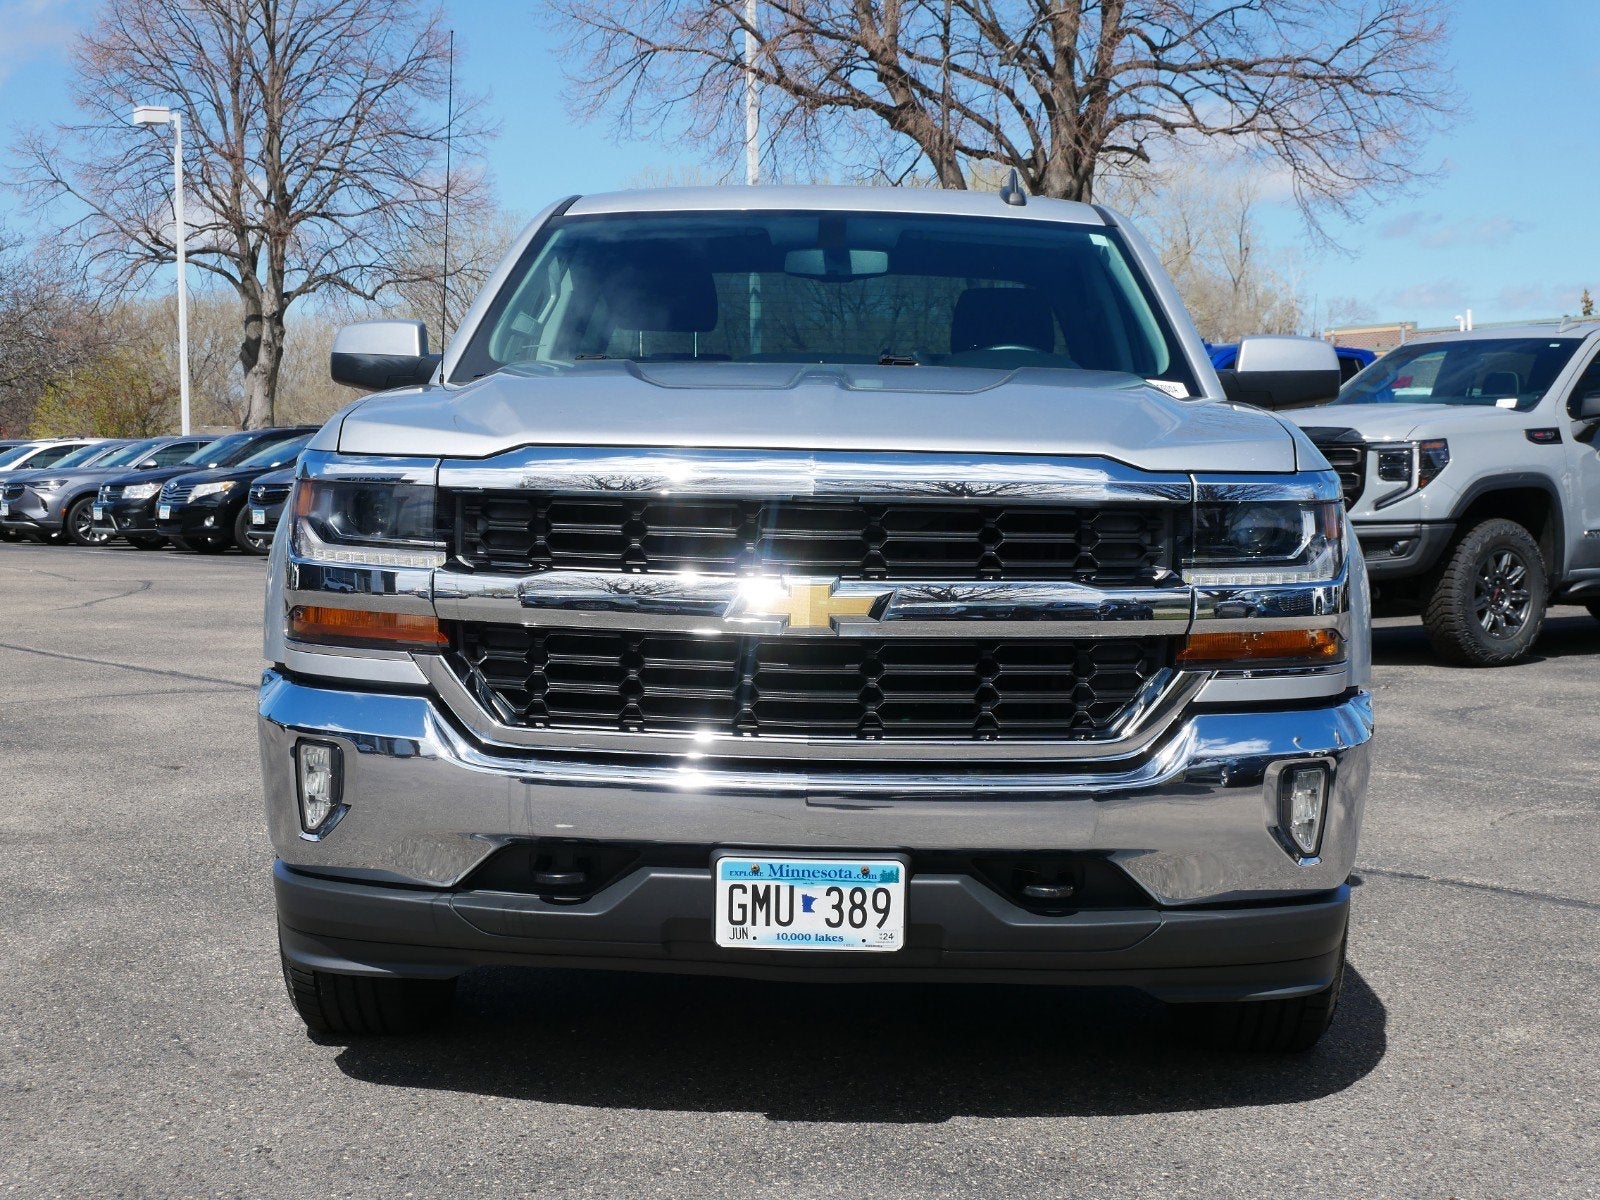 Used 2016 Chevrolet Silverado 1500 LT with VIN 3GCUKREC6GG261948 for sale in Apple Valley, Minnesota